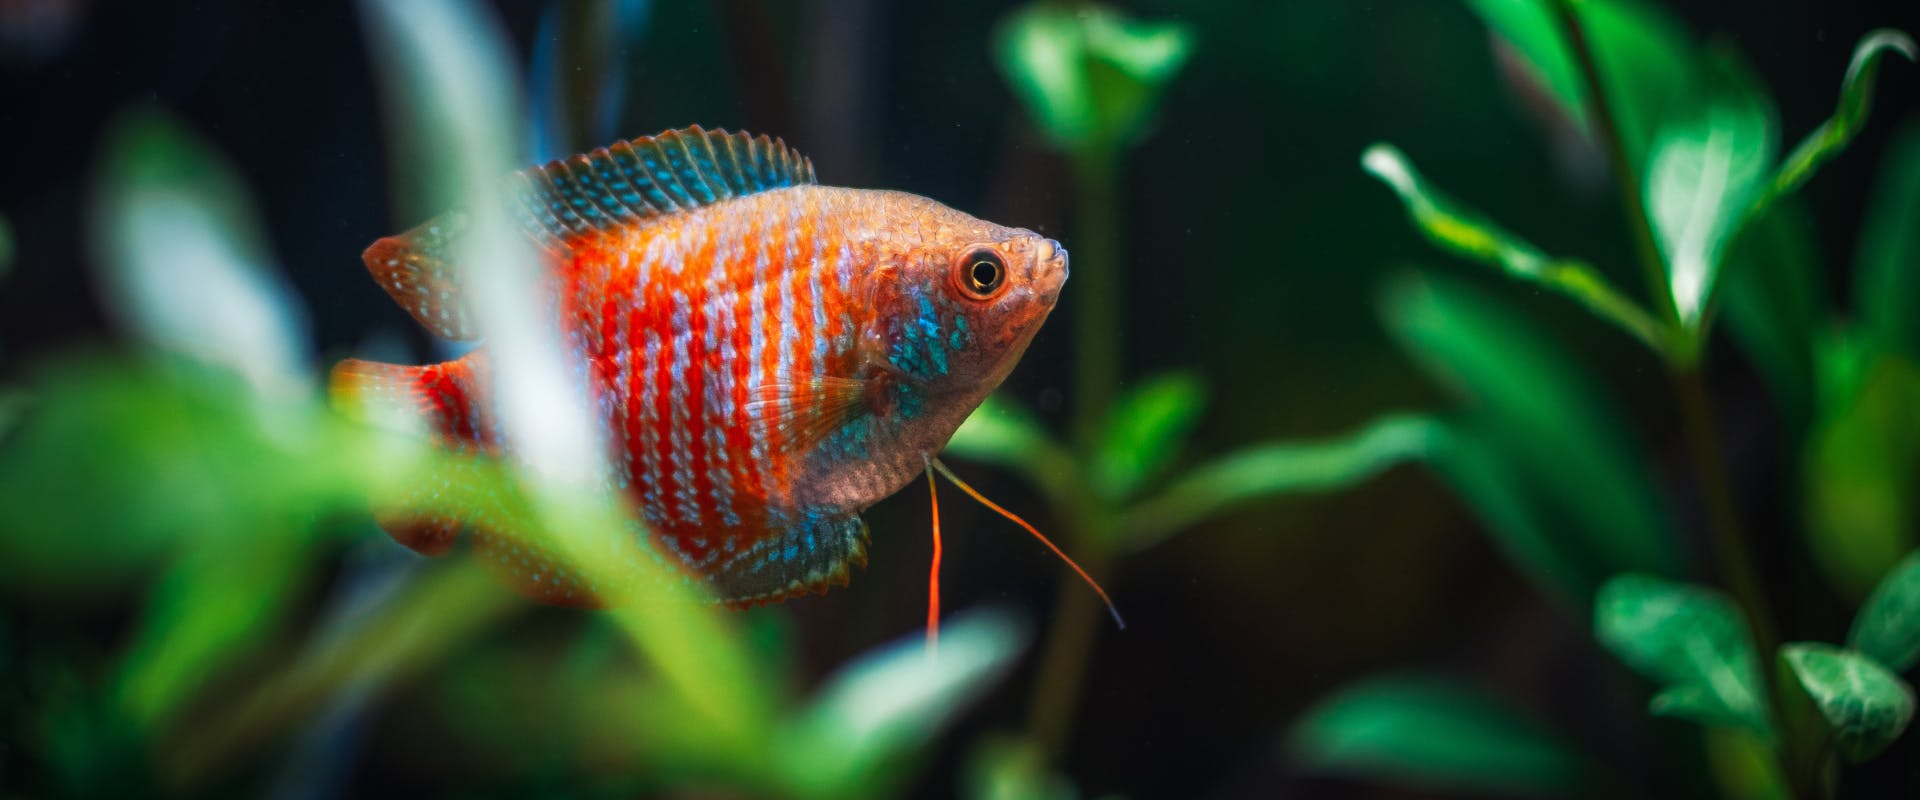 a luminous orange white and blue finned shish swimming amongst live plants in a freshwater tank